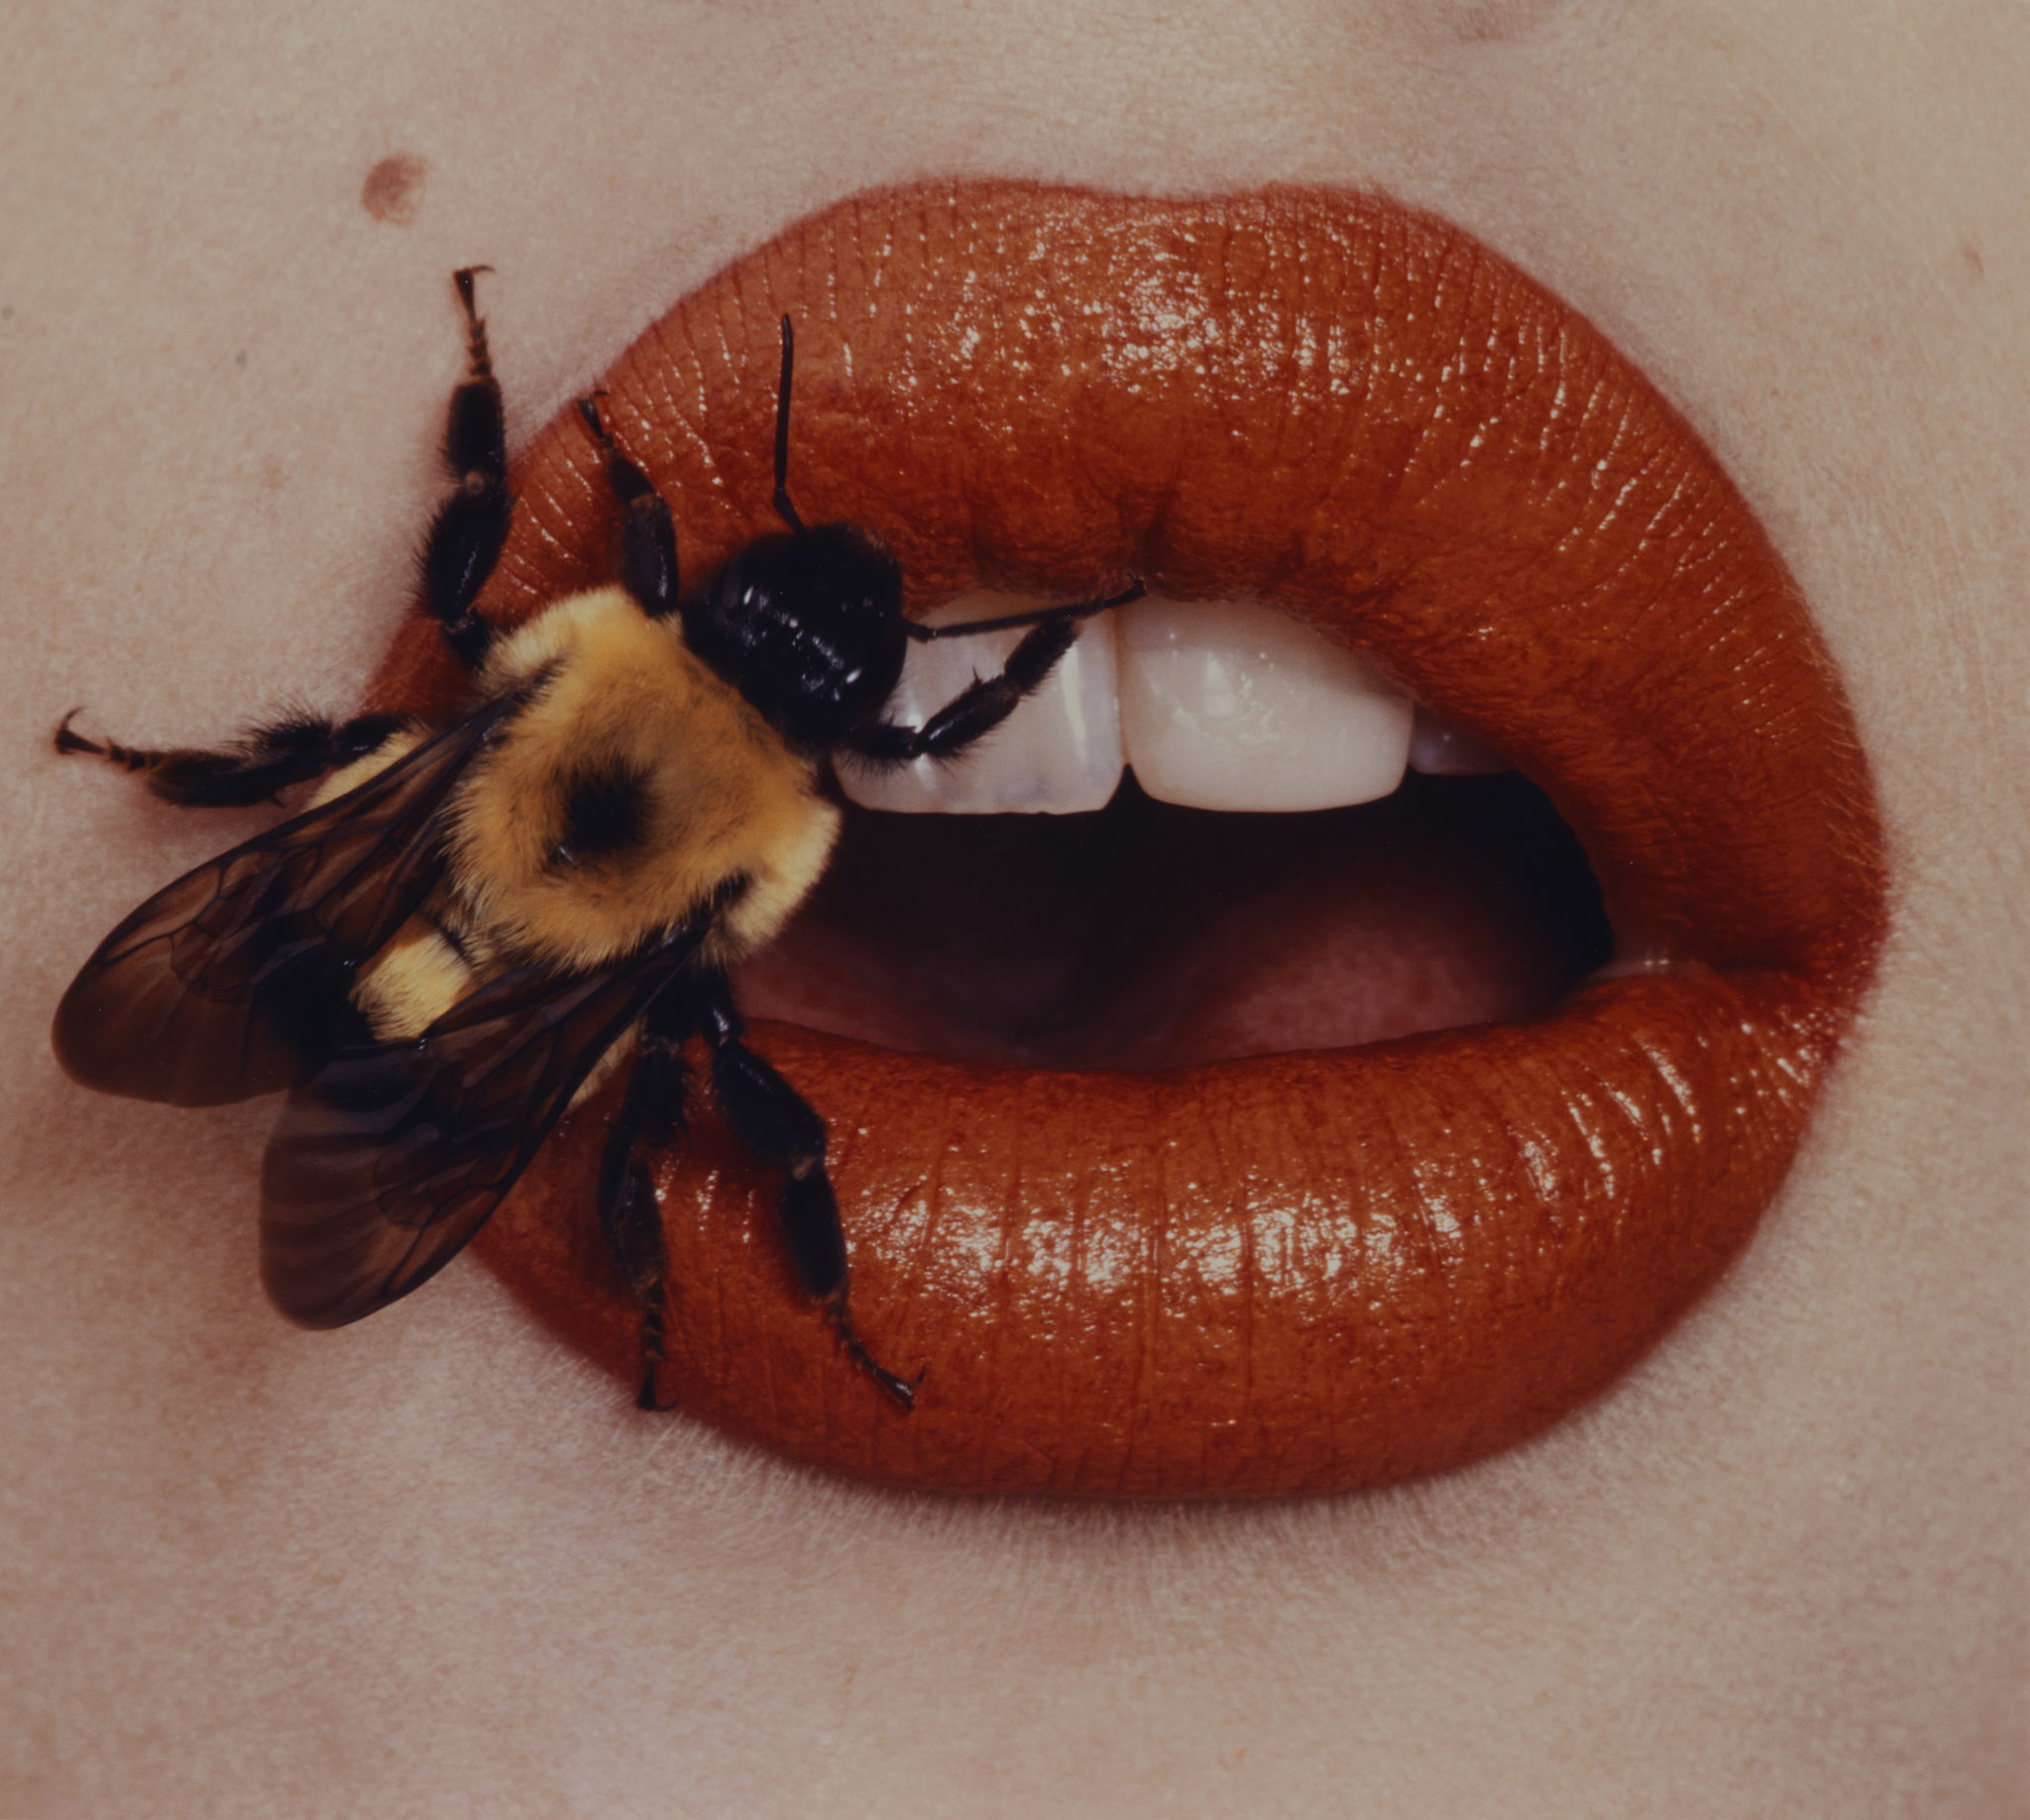 Previously Unseen Photos from Irving Penn to Appear in Retrospective